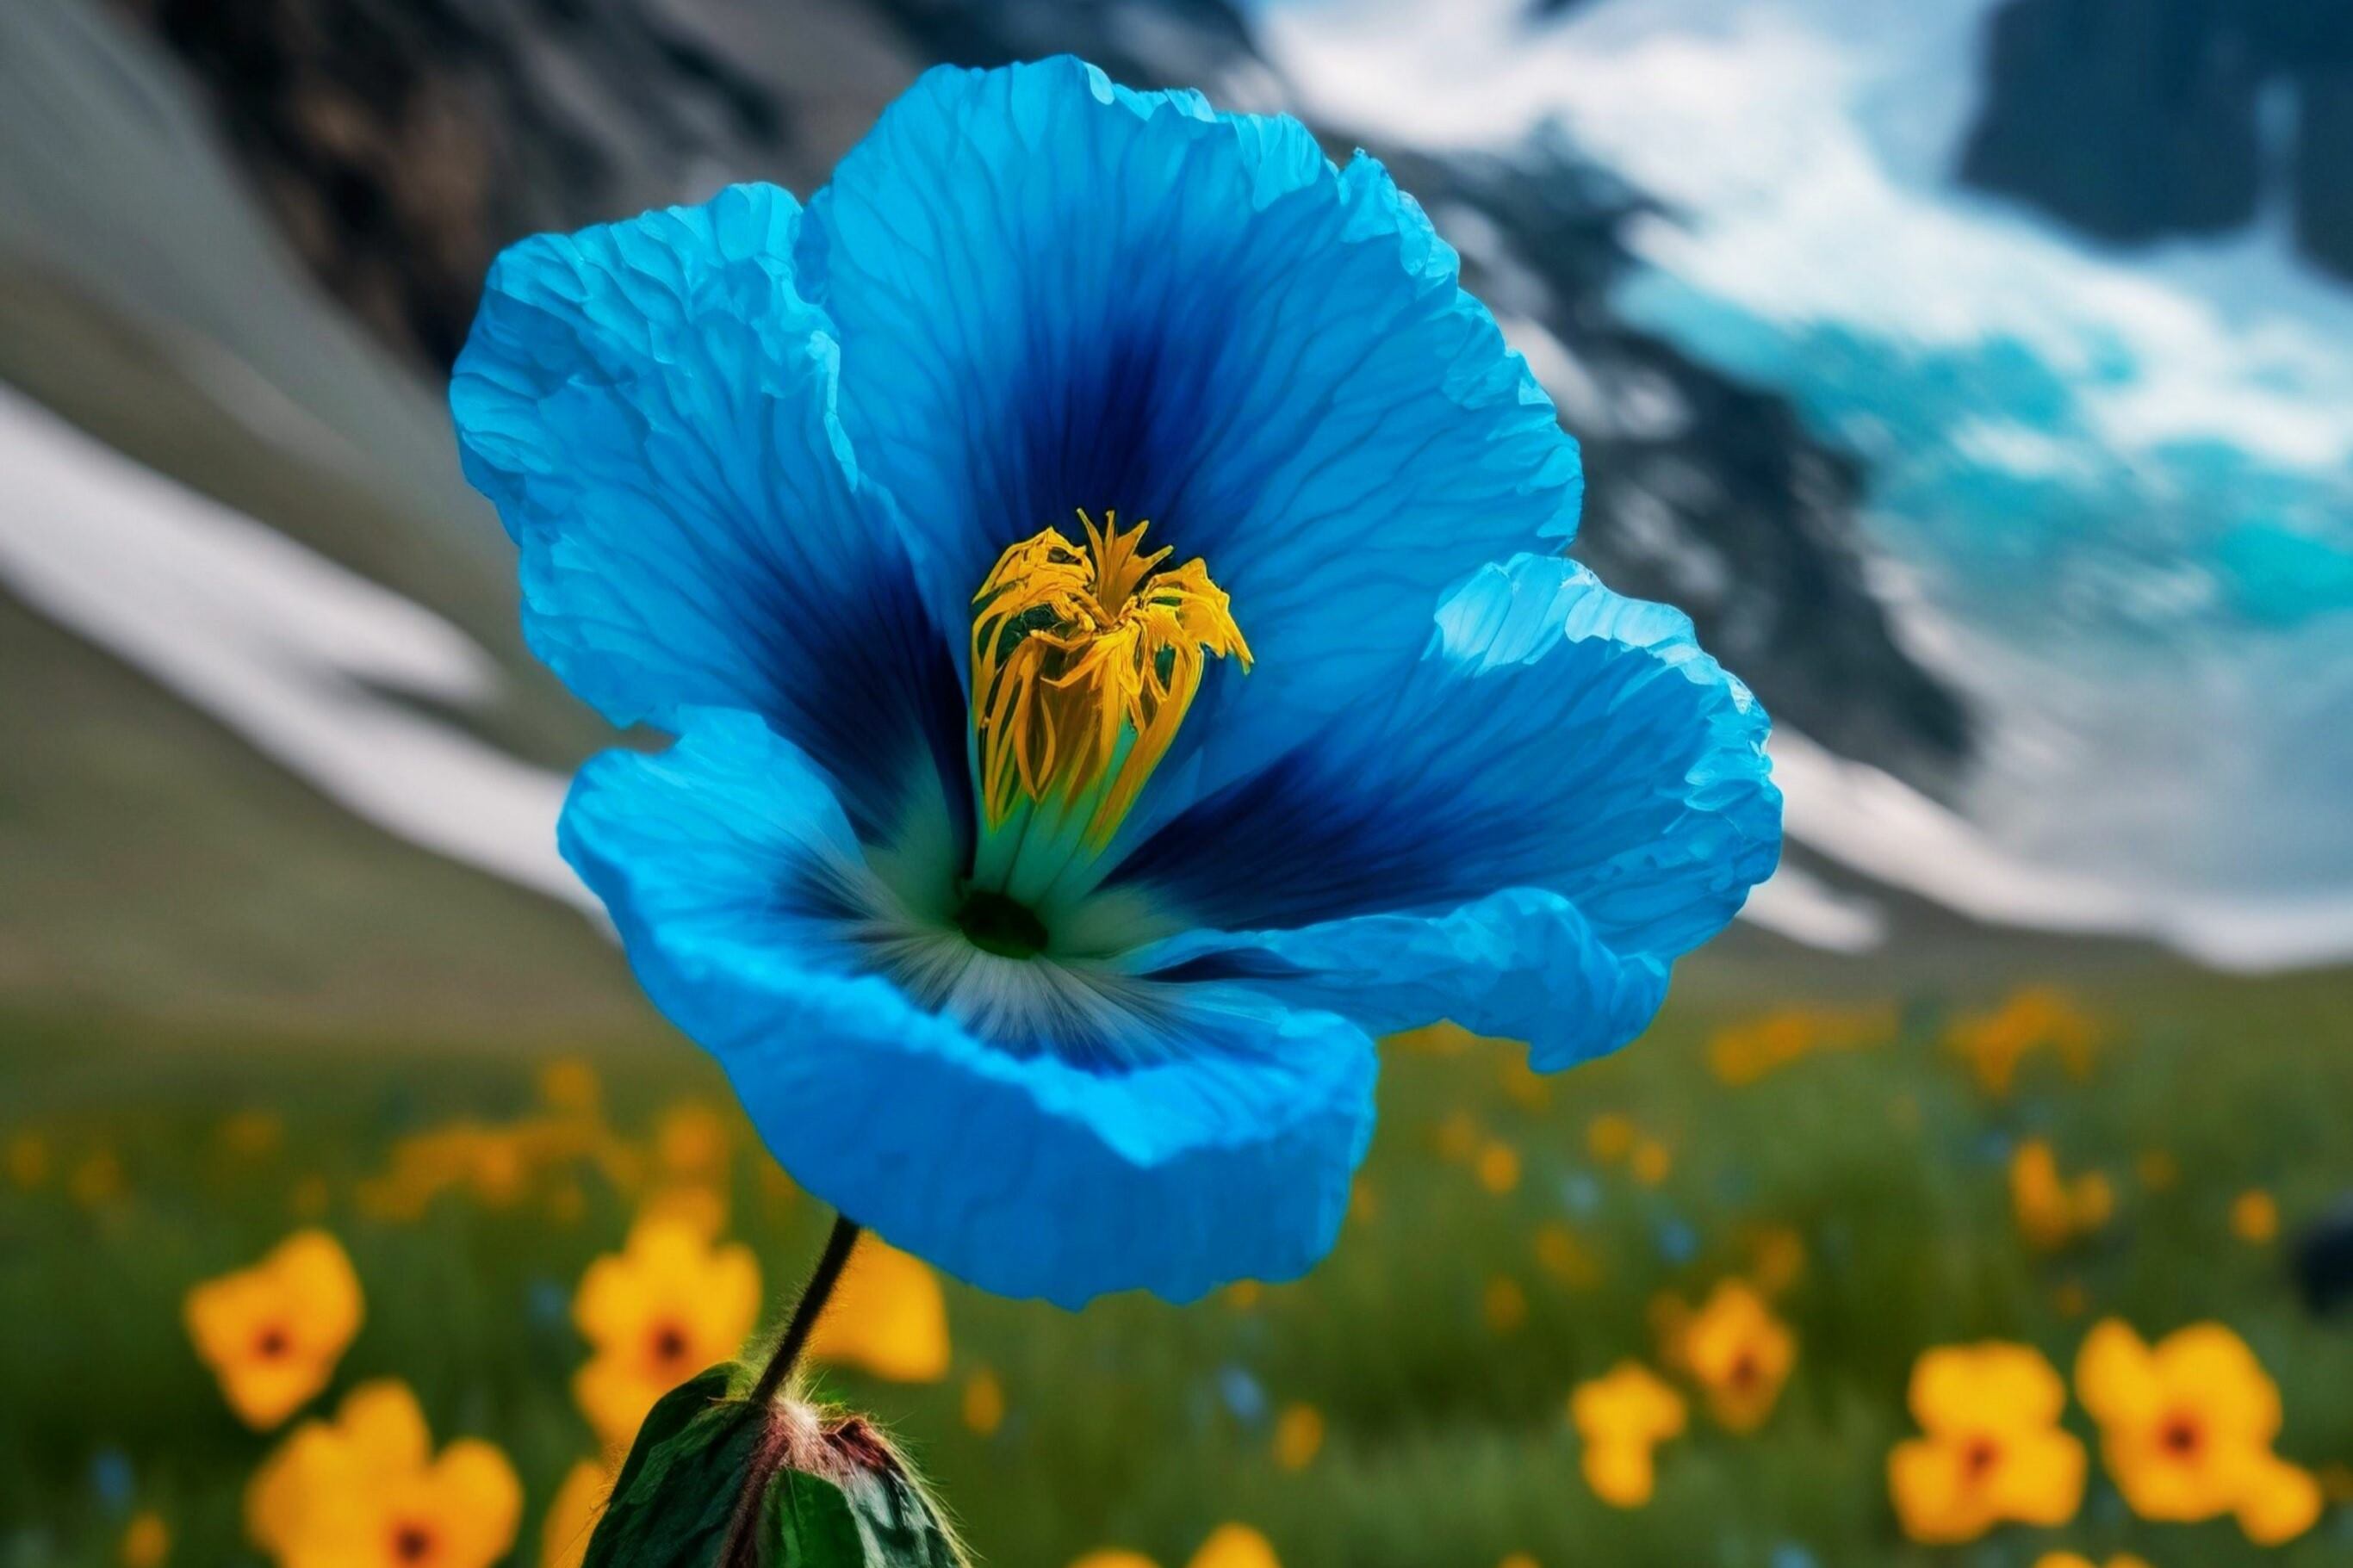 Discover The Meaning Behind Blue And Yellow Flowers - A Symbol Of Joy And Serenity!